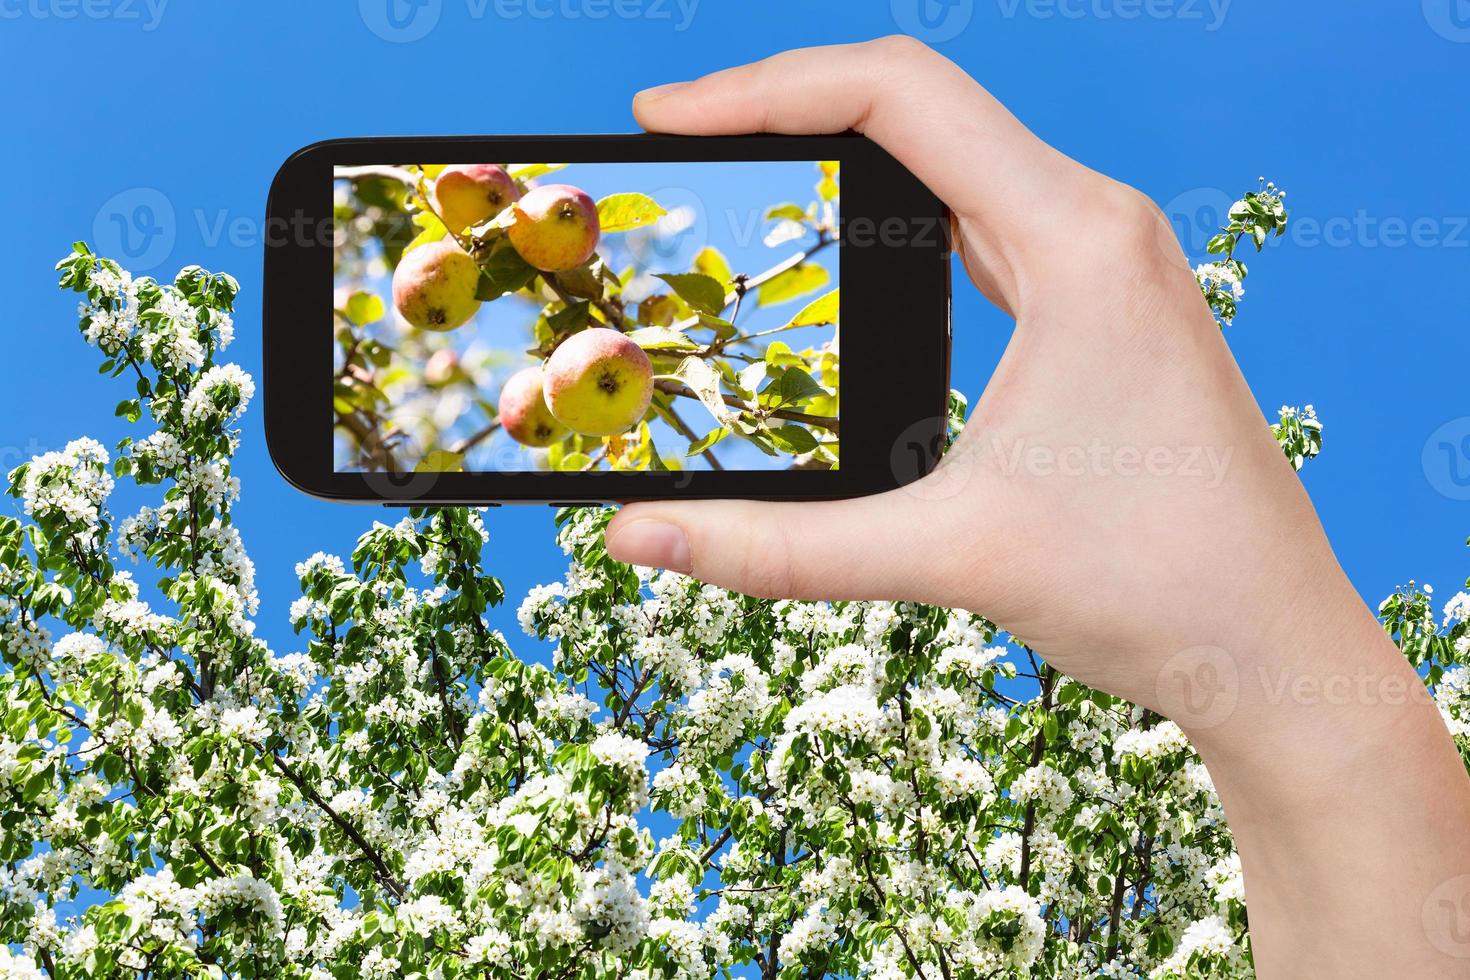 photo of apples on tree with blossoms and blue sky